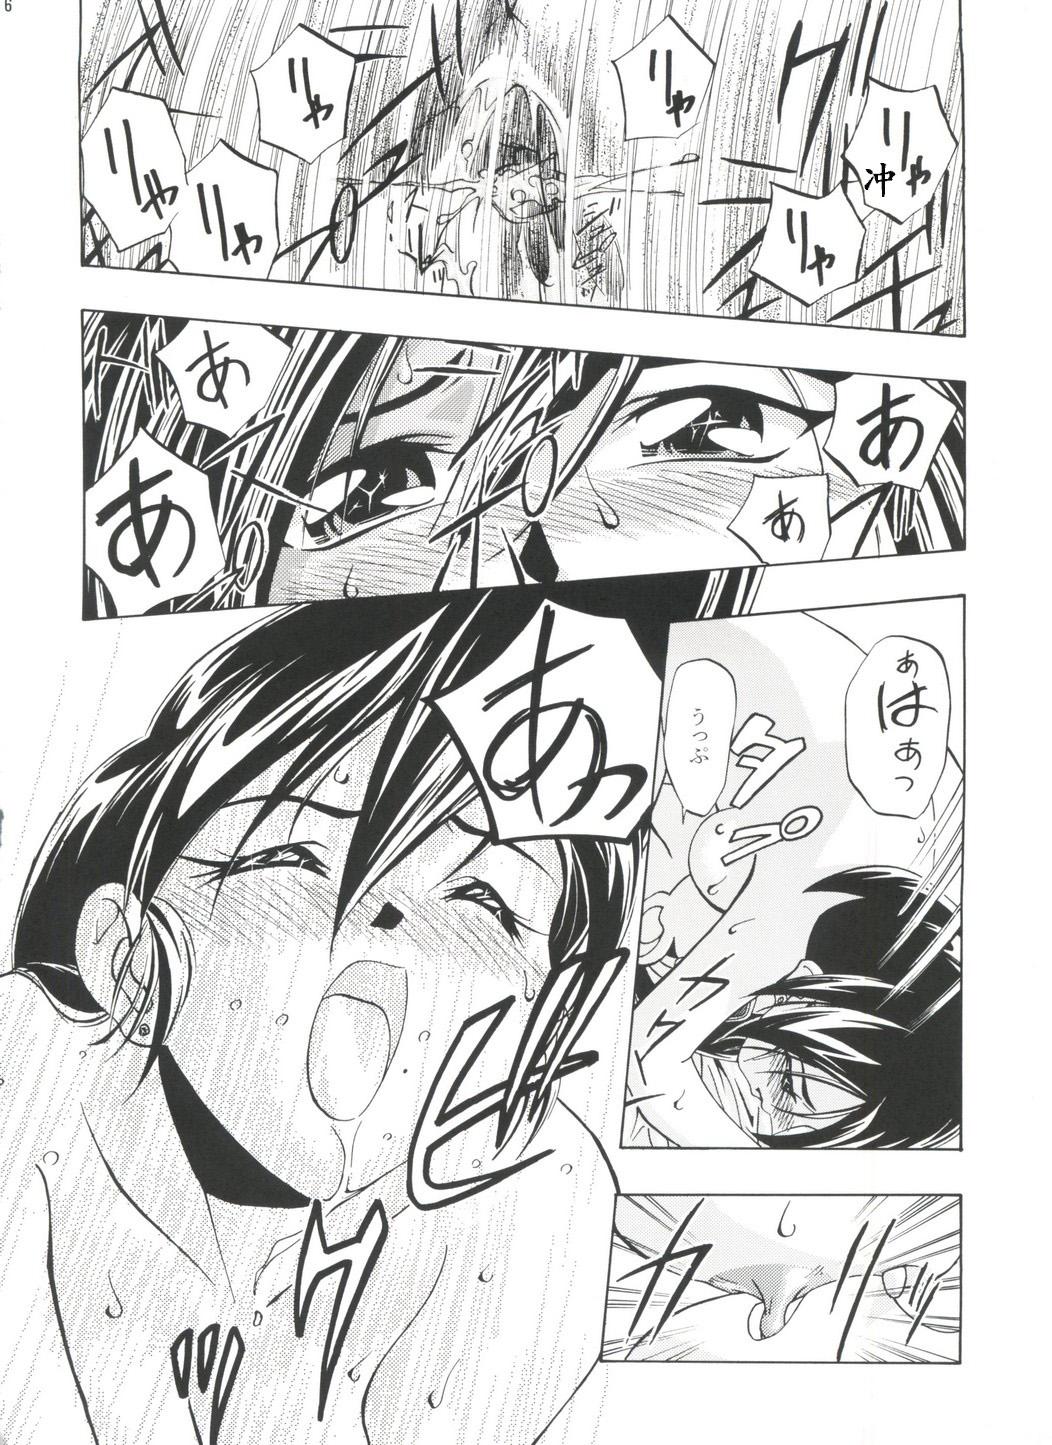 High Taiketsu! Go VS Fighter! - Bakusou kyoudai lets and go Gaysex - Page 10